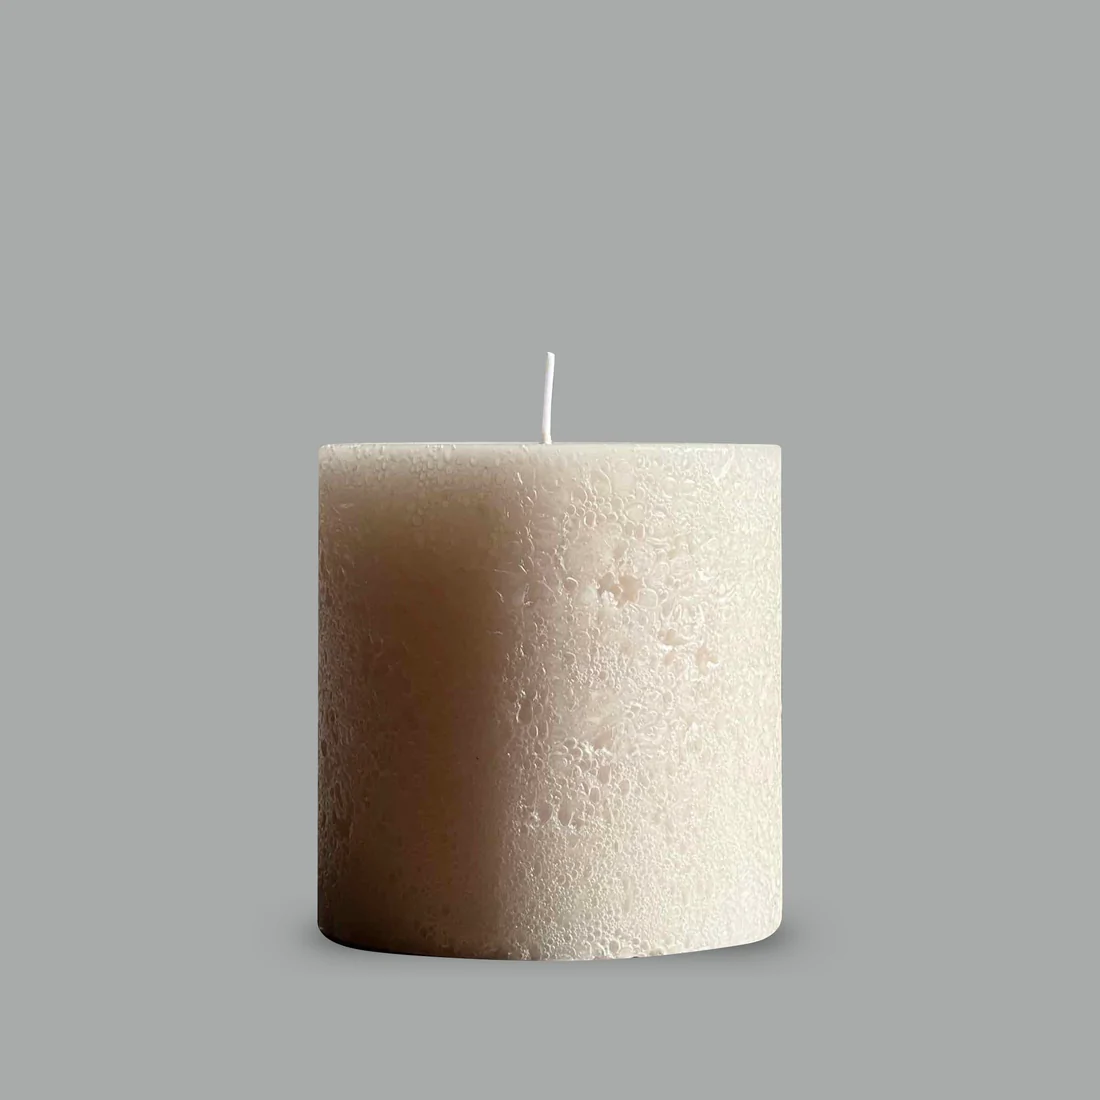 Candle Kiosk - Textured Sandstone Pillar Candles - small candle - Stocked at LOVINLIFE Co Byron Bay for all your gifts, candles and interior decorating needs